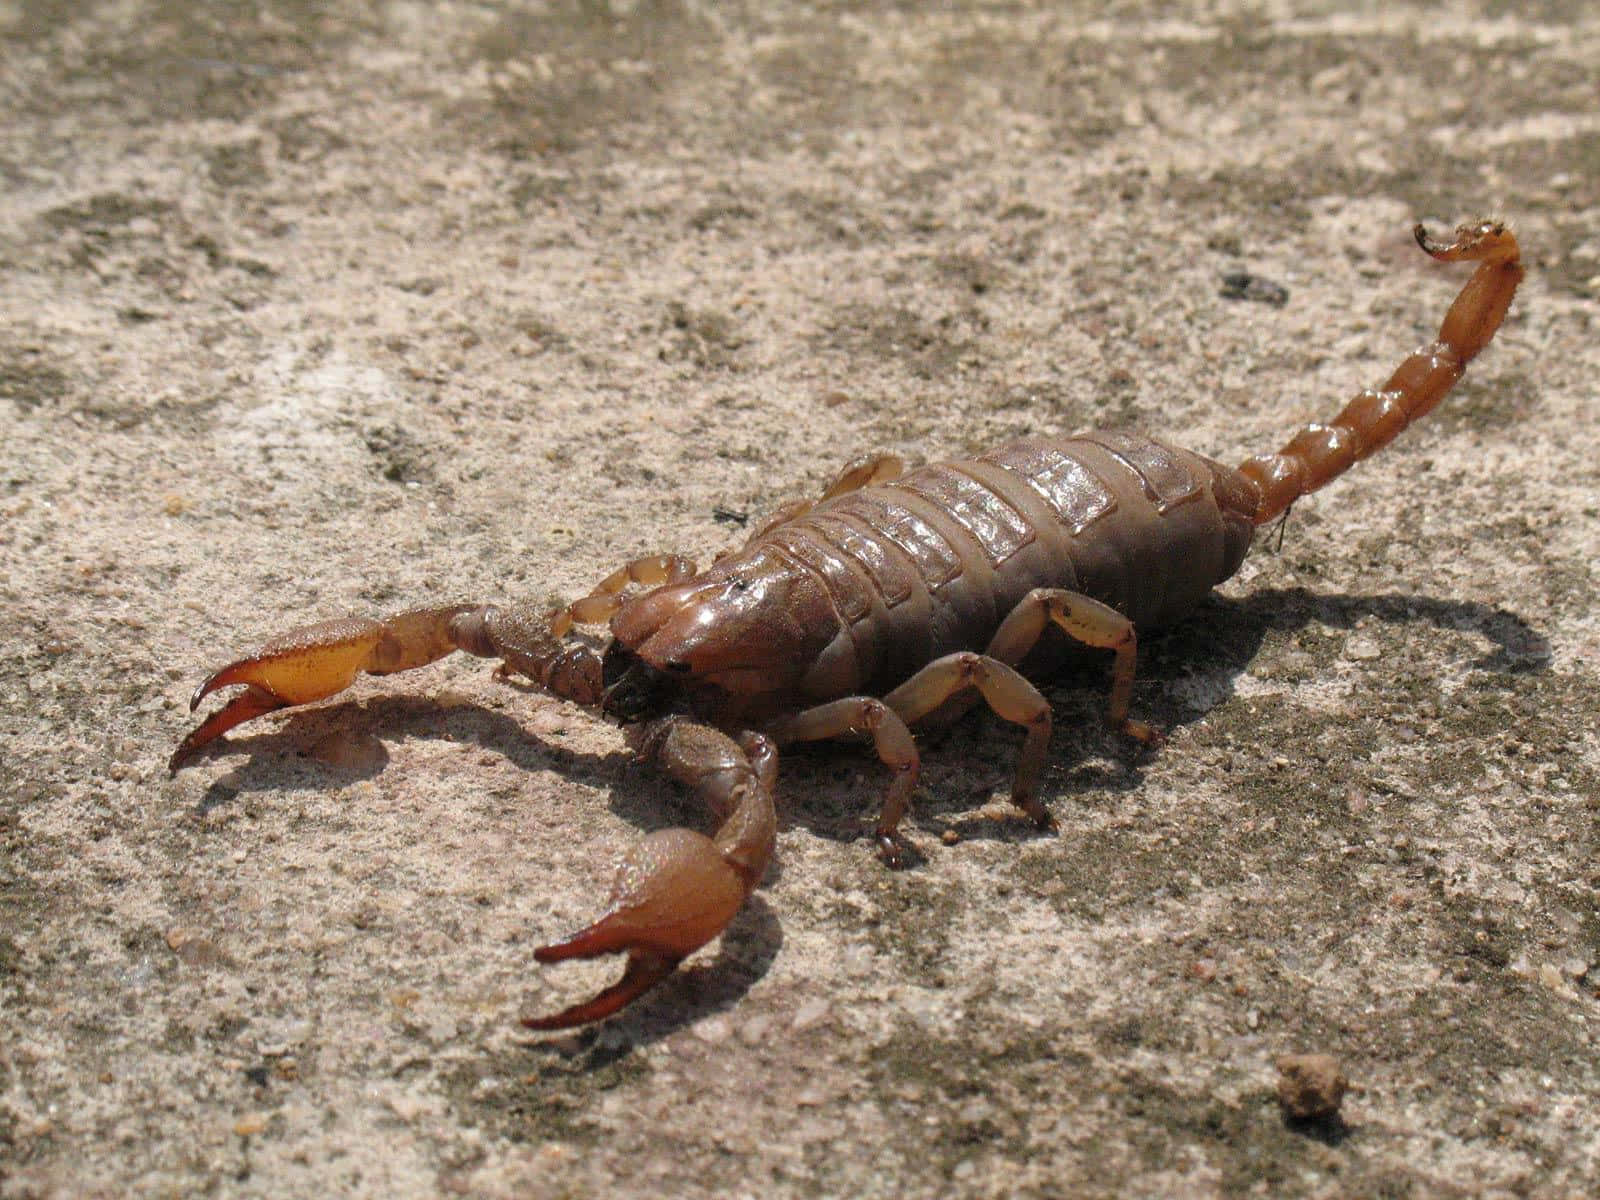 Intimidating Stare of a Horned Scorpion